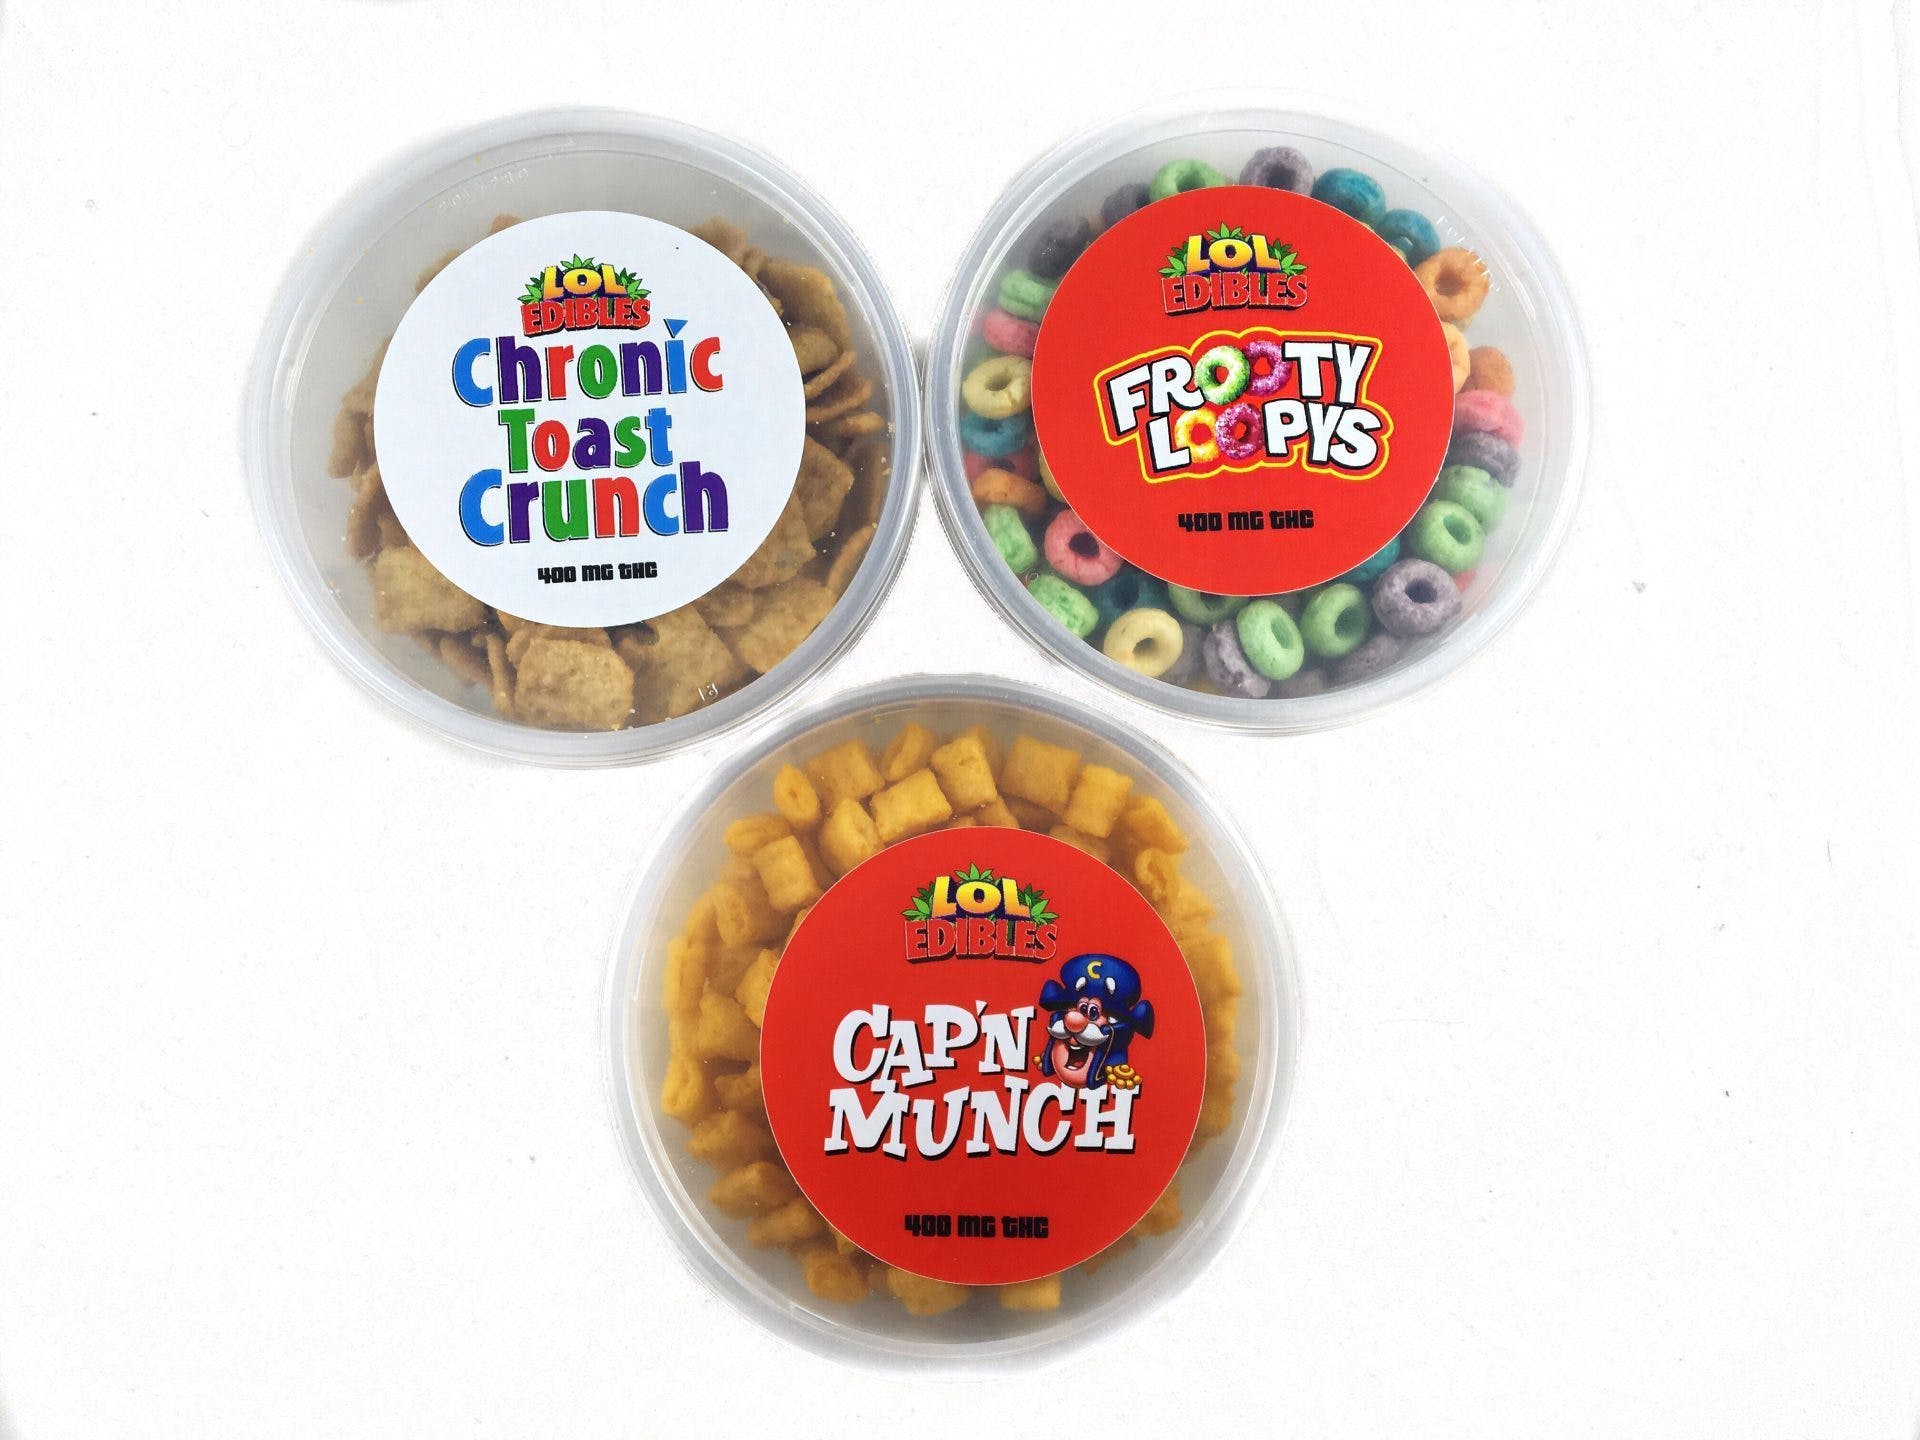 edible-lol-cereal-fruity-loopys-400-mg